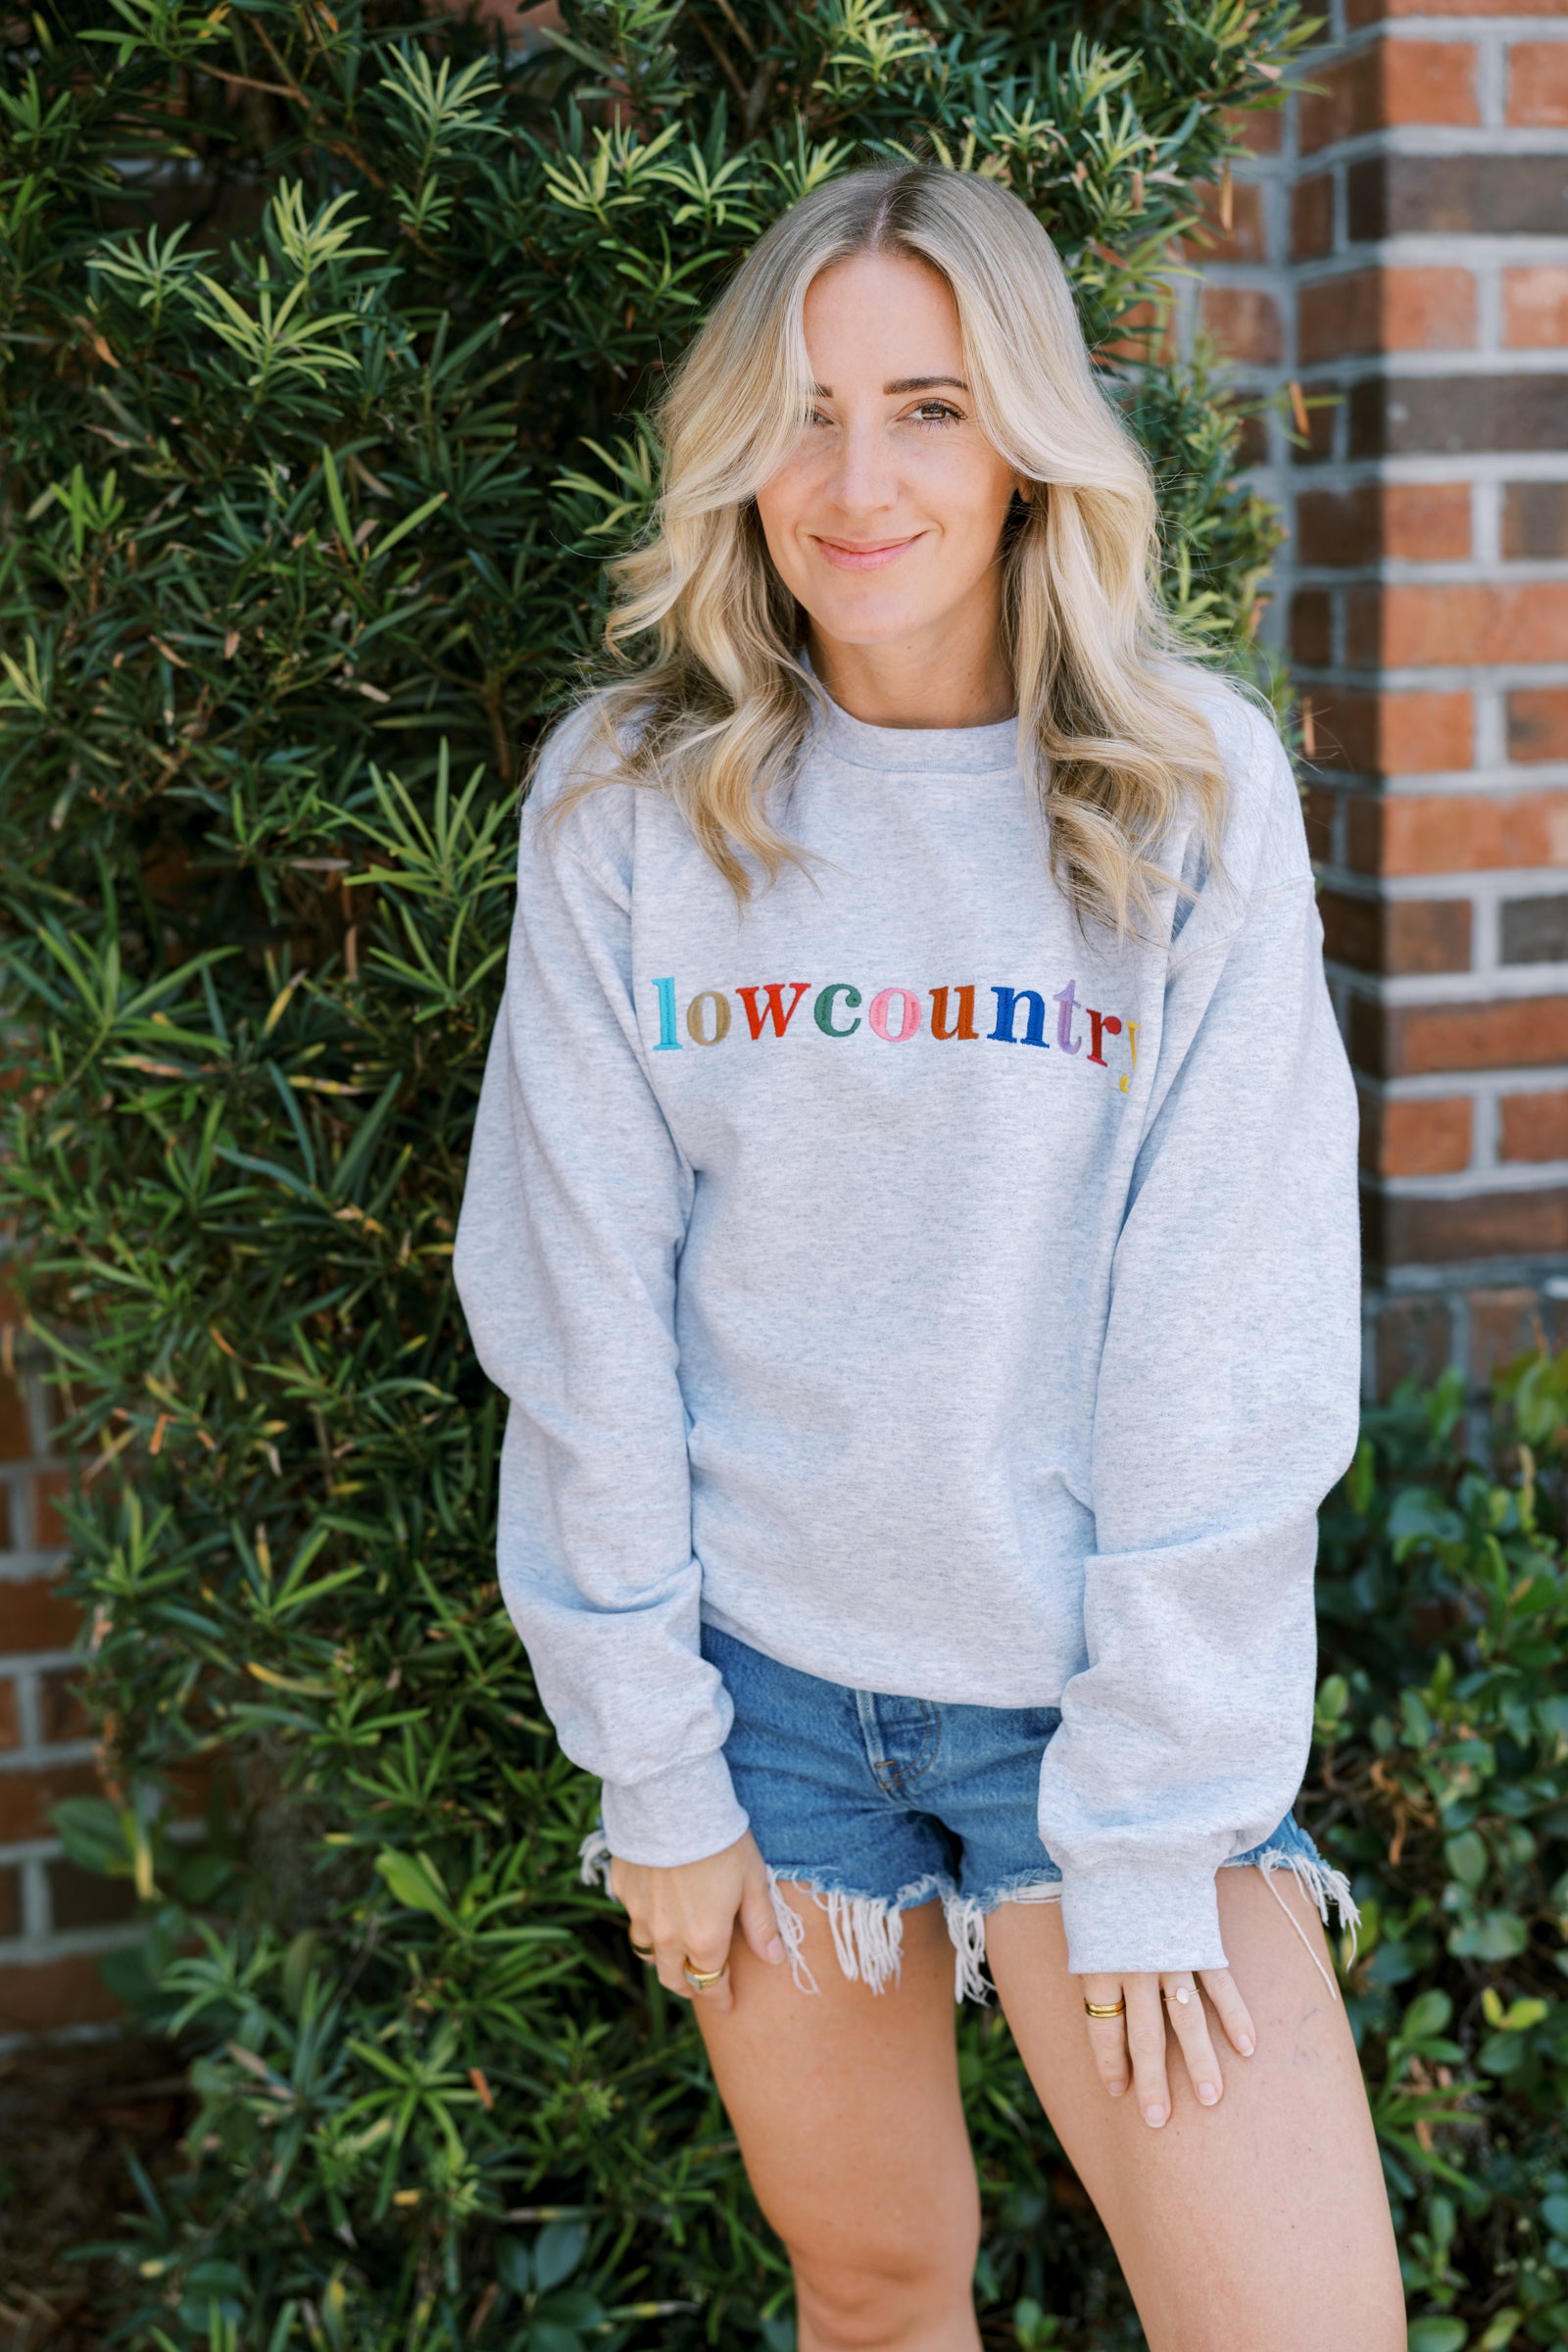 Lowcountry Embroidered Crewneck